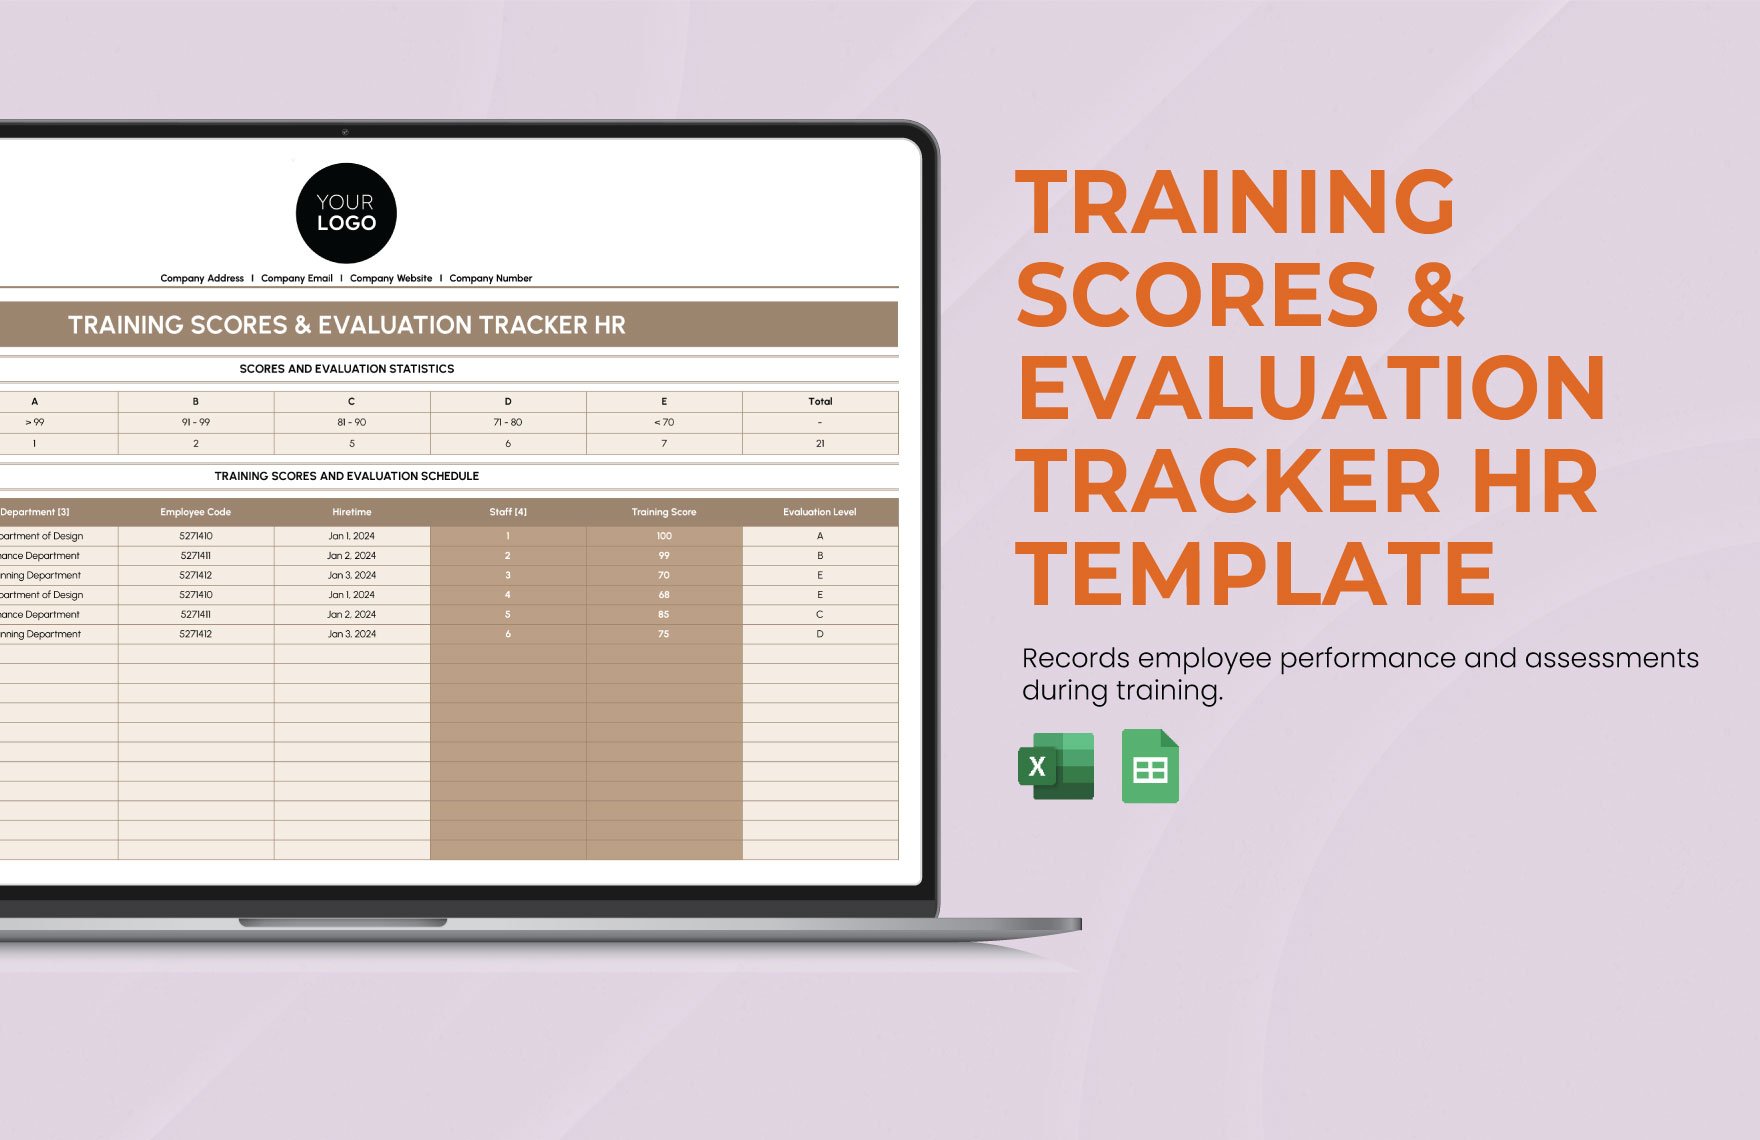 Free Training Scores & Evaluation Tracker HR Template